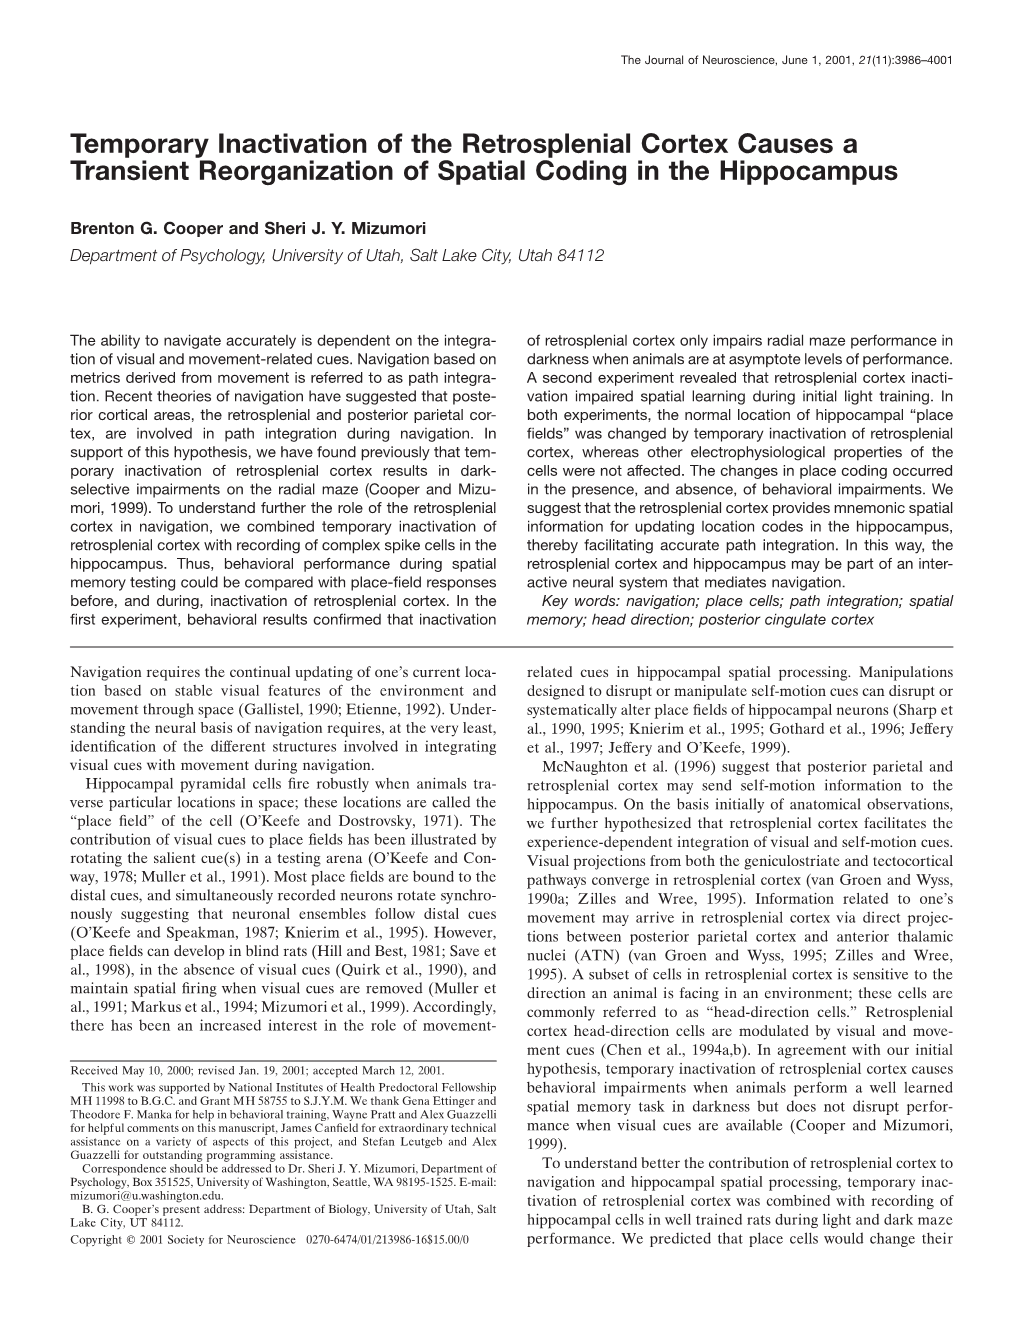 Temporary Inactivation of the Retrosplenial Cortex Causes a Transient Reorganization of Spatial Coding in the Hippocampus